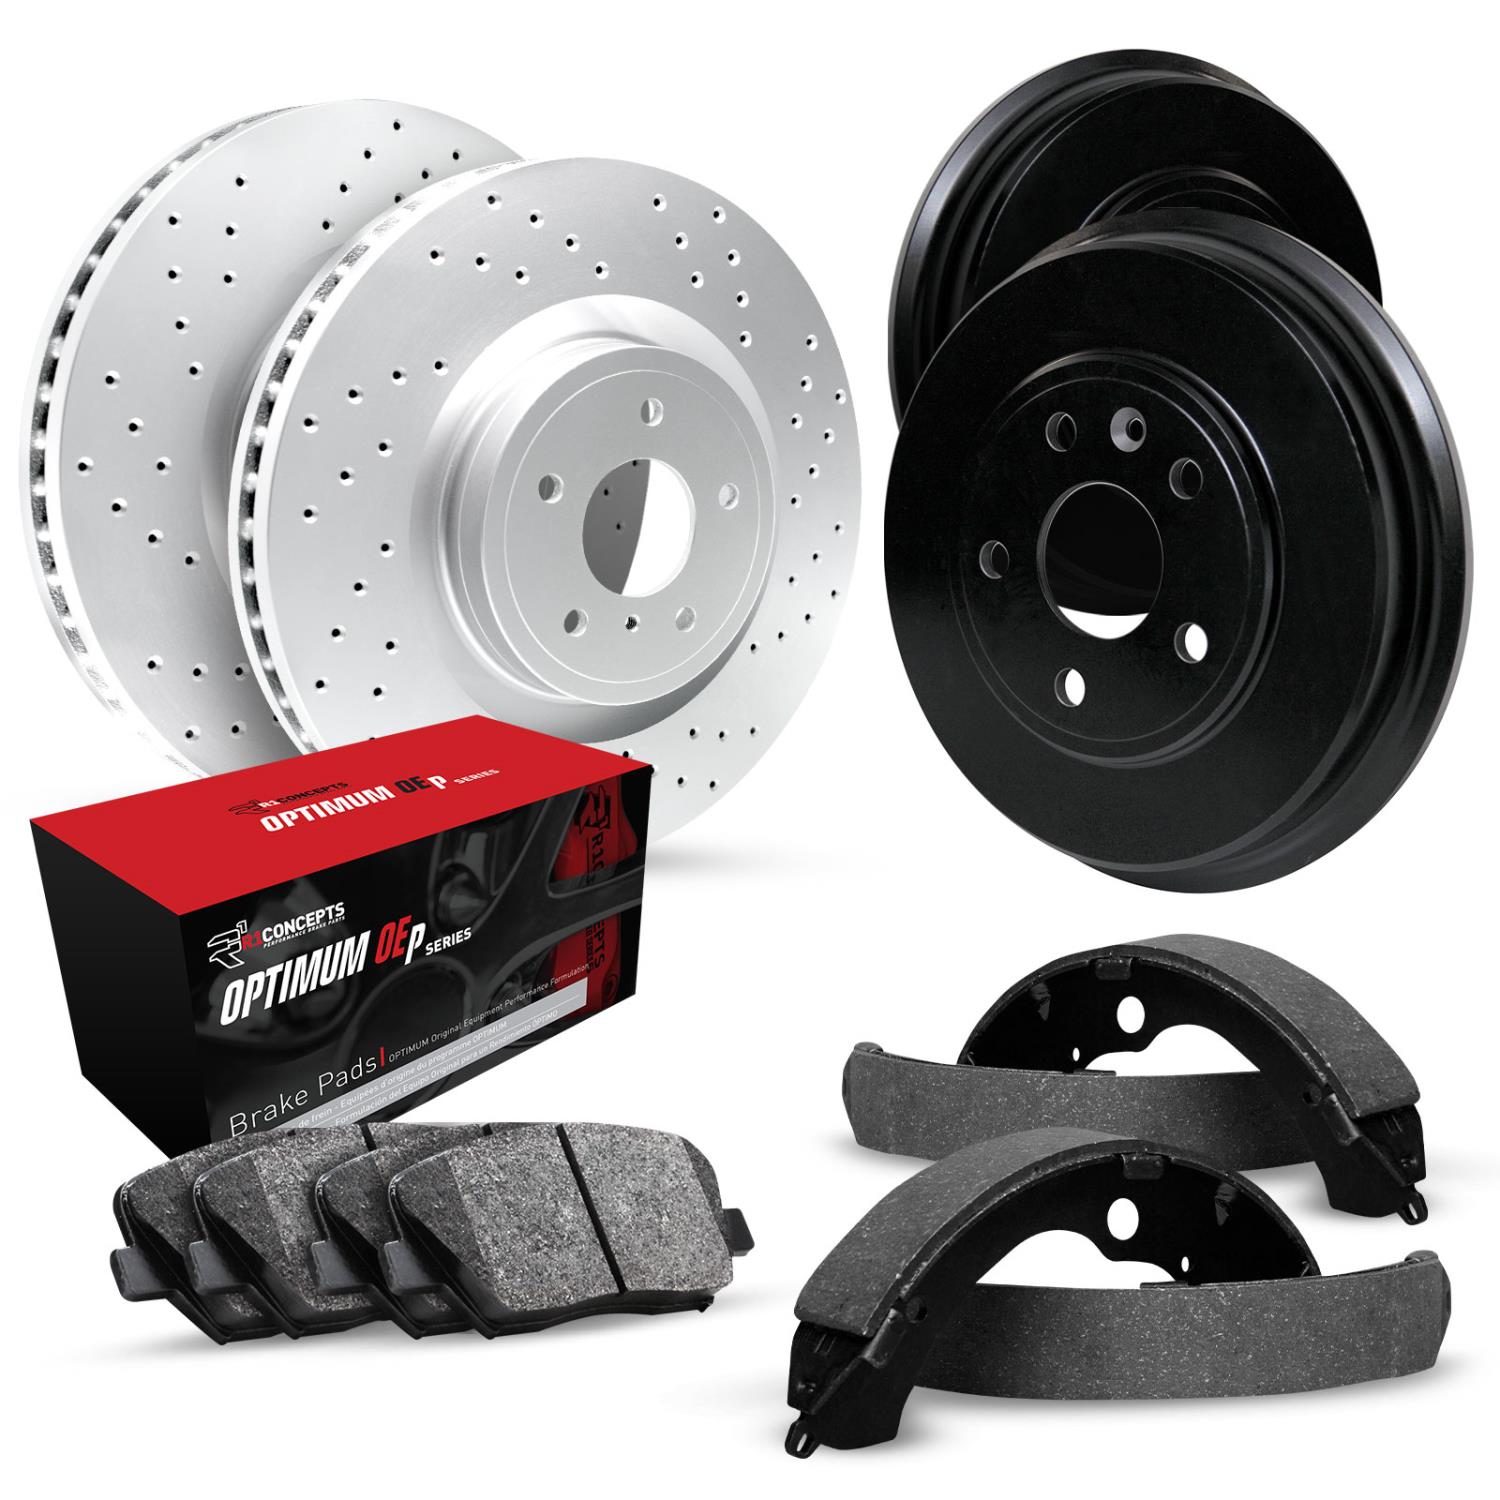 GEO-Carbon Drilled Brake Rotor & Drum Set w/Optimum OE Pads & Shoes, 1988-1999 GM, Position: Front & Rear